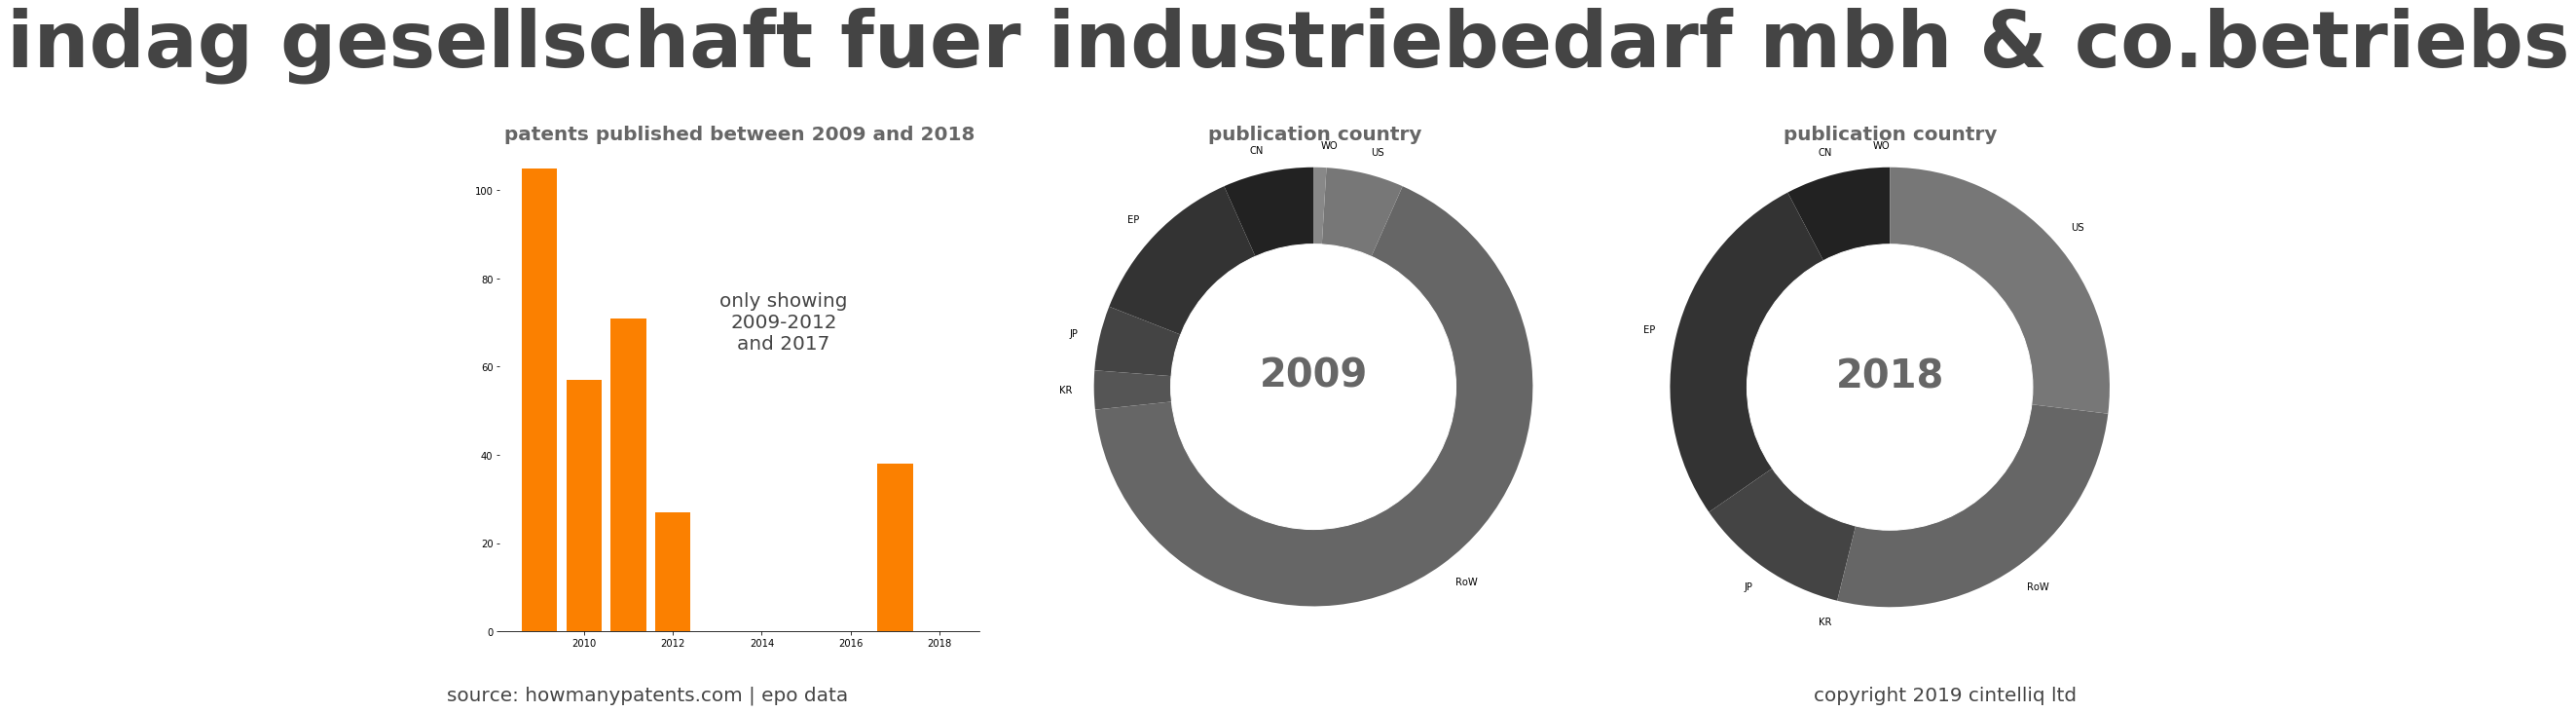 summary of patents for Indag Gesellschaft Fuer Industriebedarf Mbh & Co.Betriebs